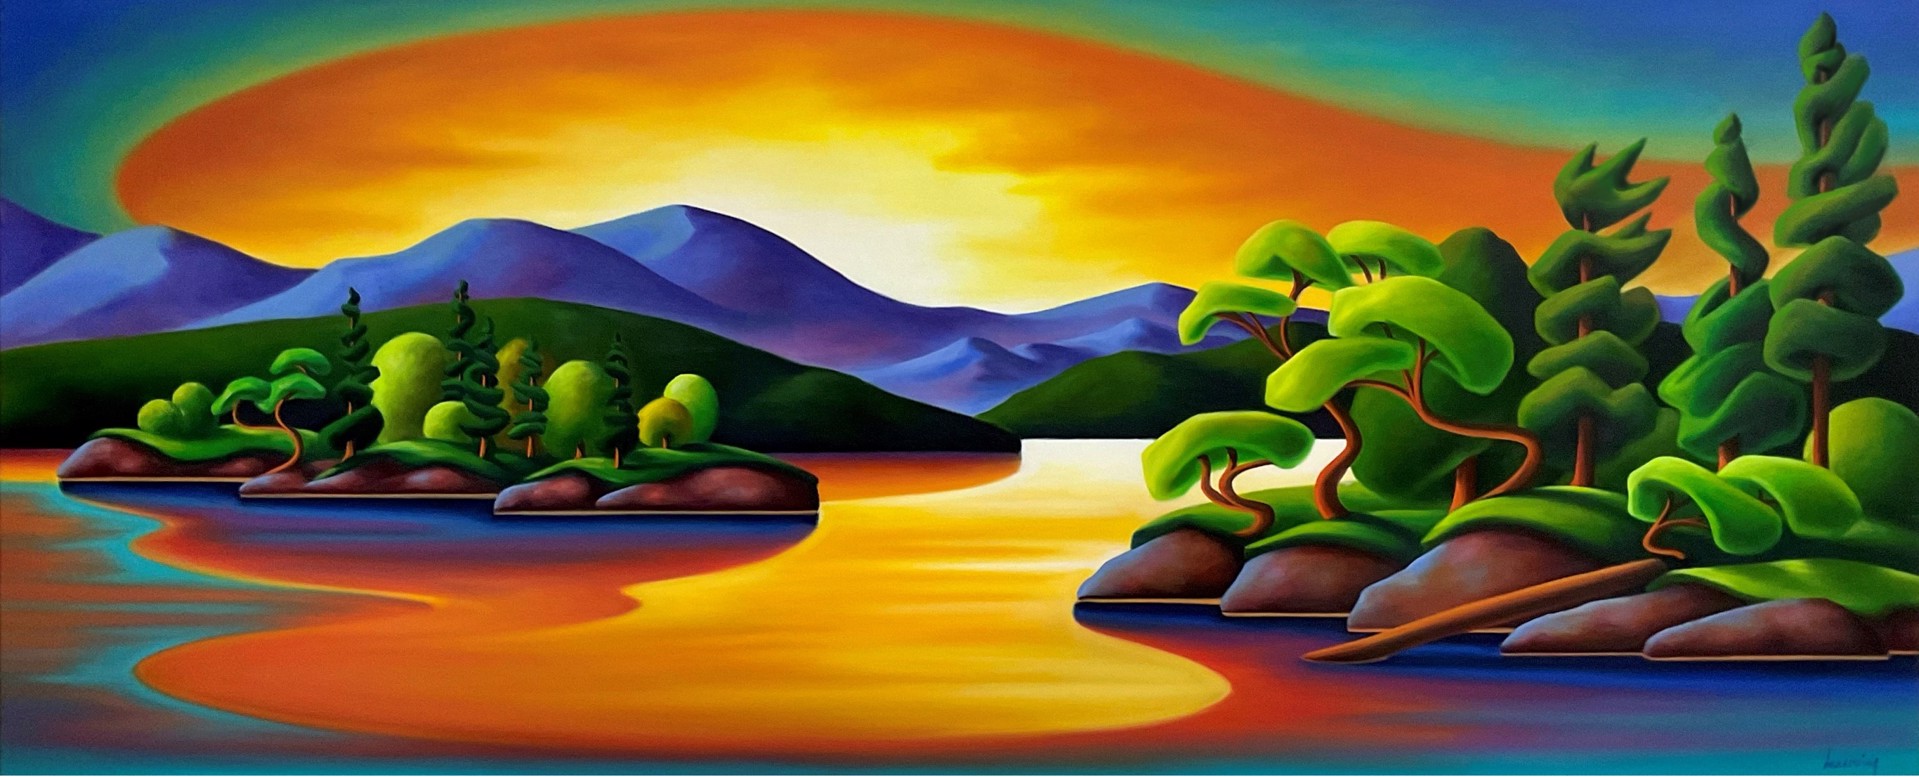 Curme Islands Sunset by DANA IRVING